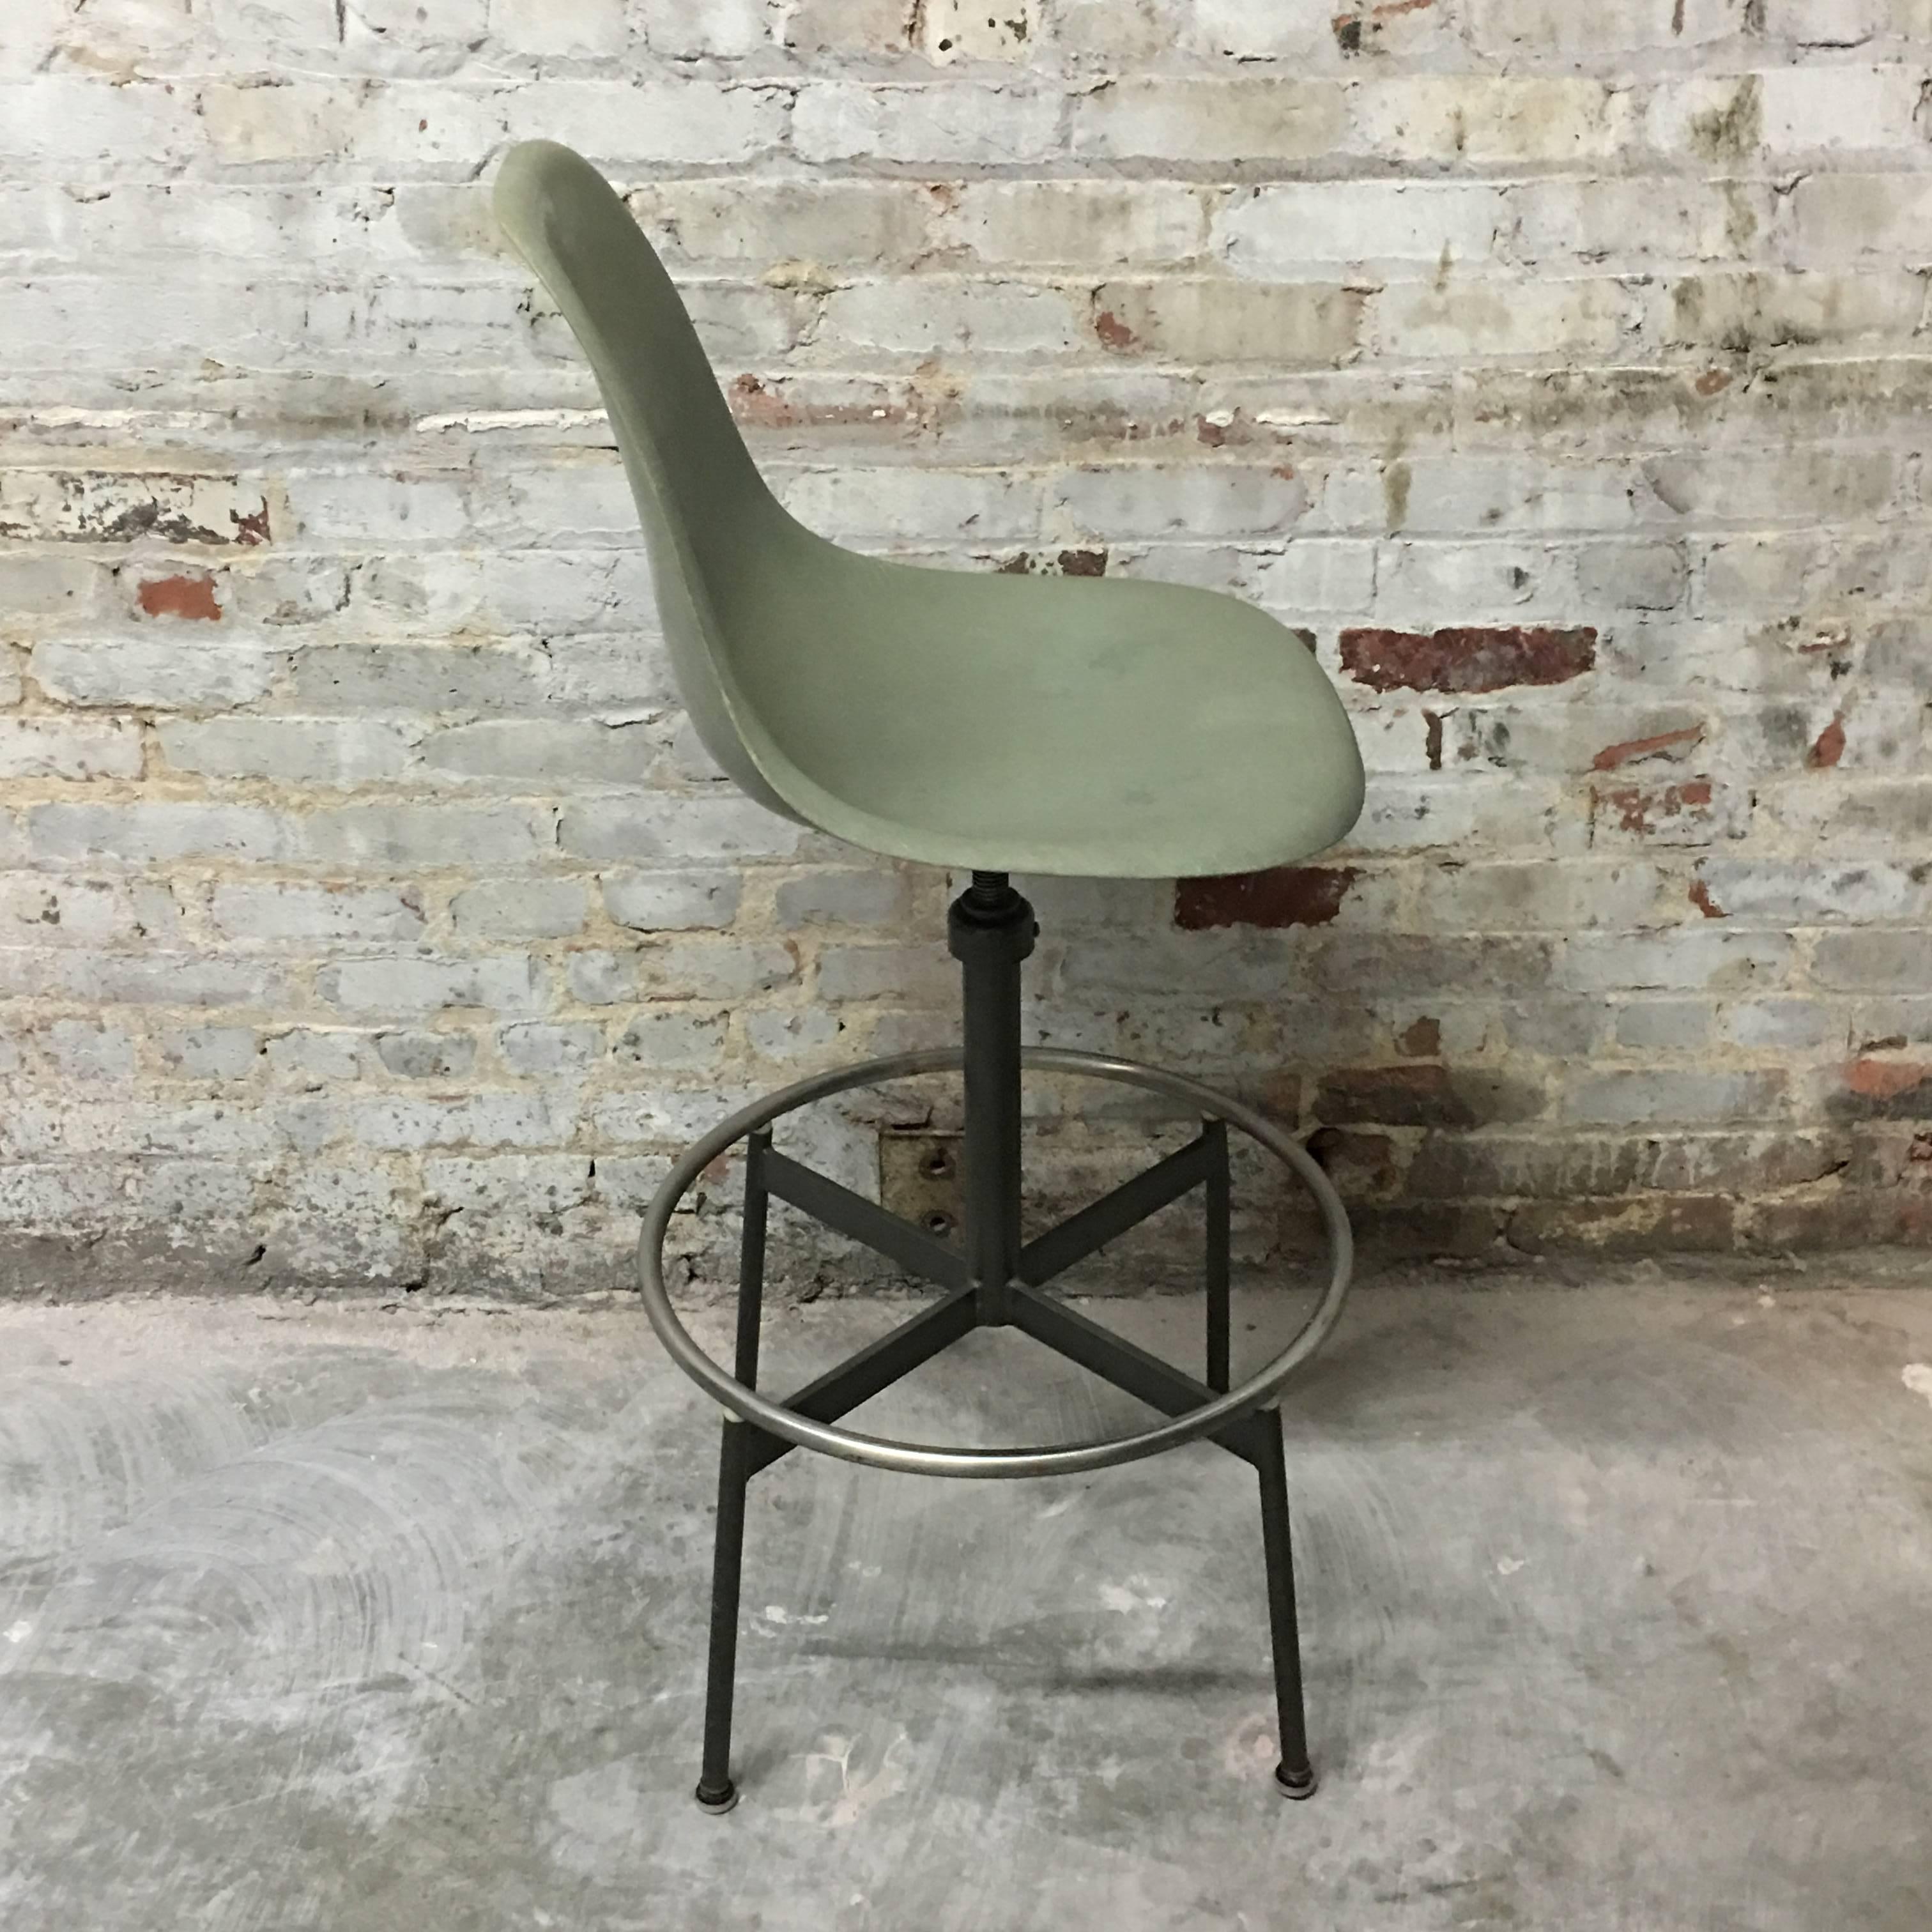 Herman Miller Eames seafoam green shell on rare architect's drafting base. Shell near perfect. Adjustable height base with swivel. In excellent condition.